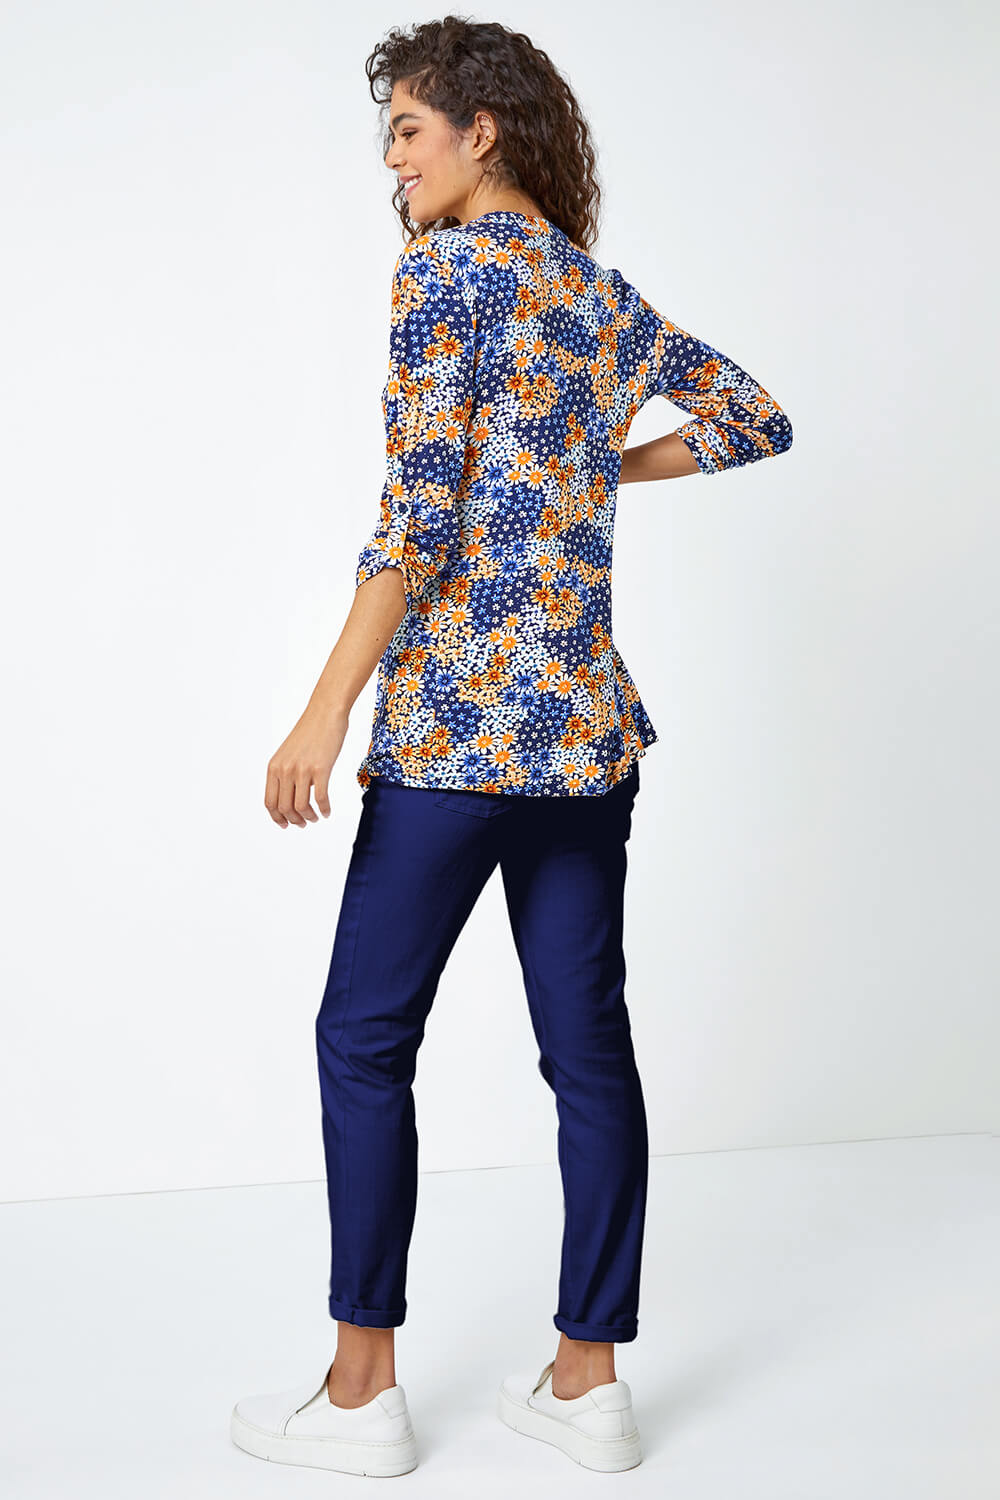 ORANGE Ditsy Floral Pintuck 3/4 Sleeve Jersey Shirt, Image 2 of 5